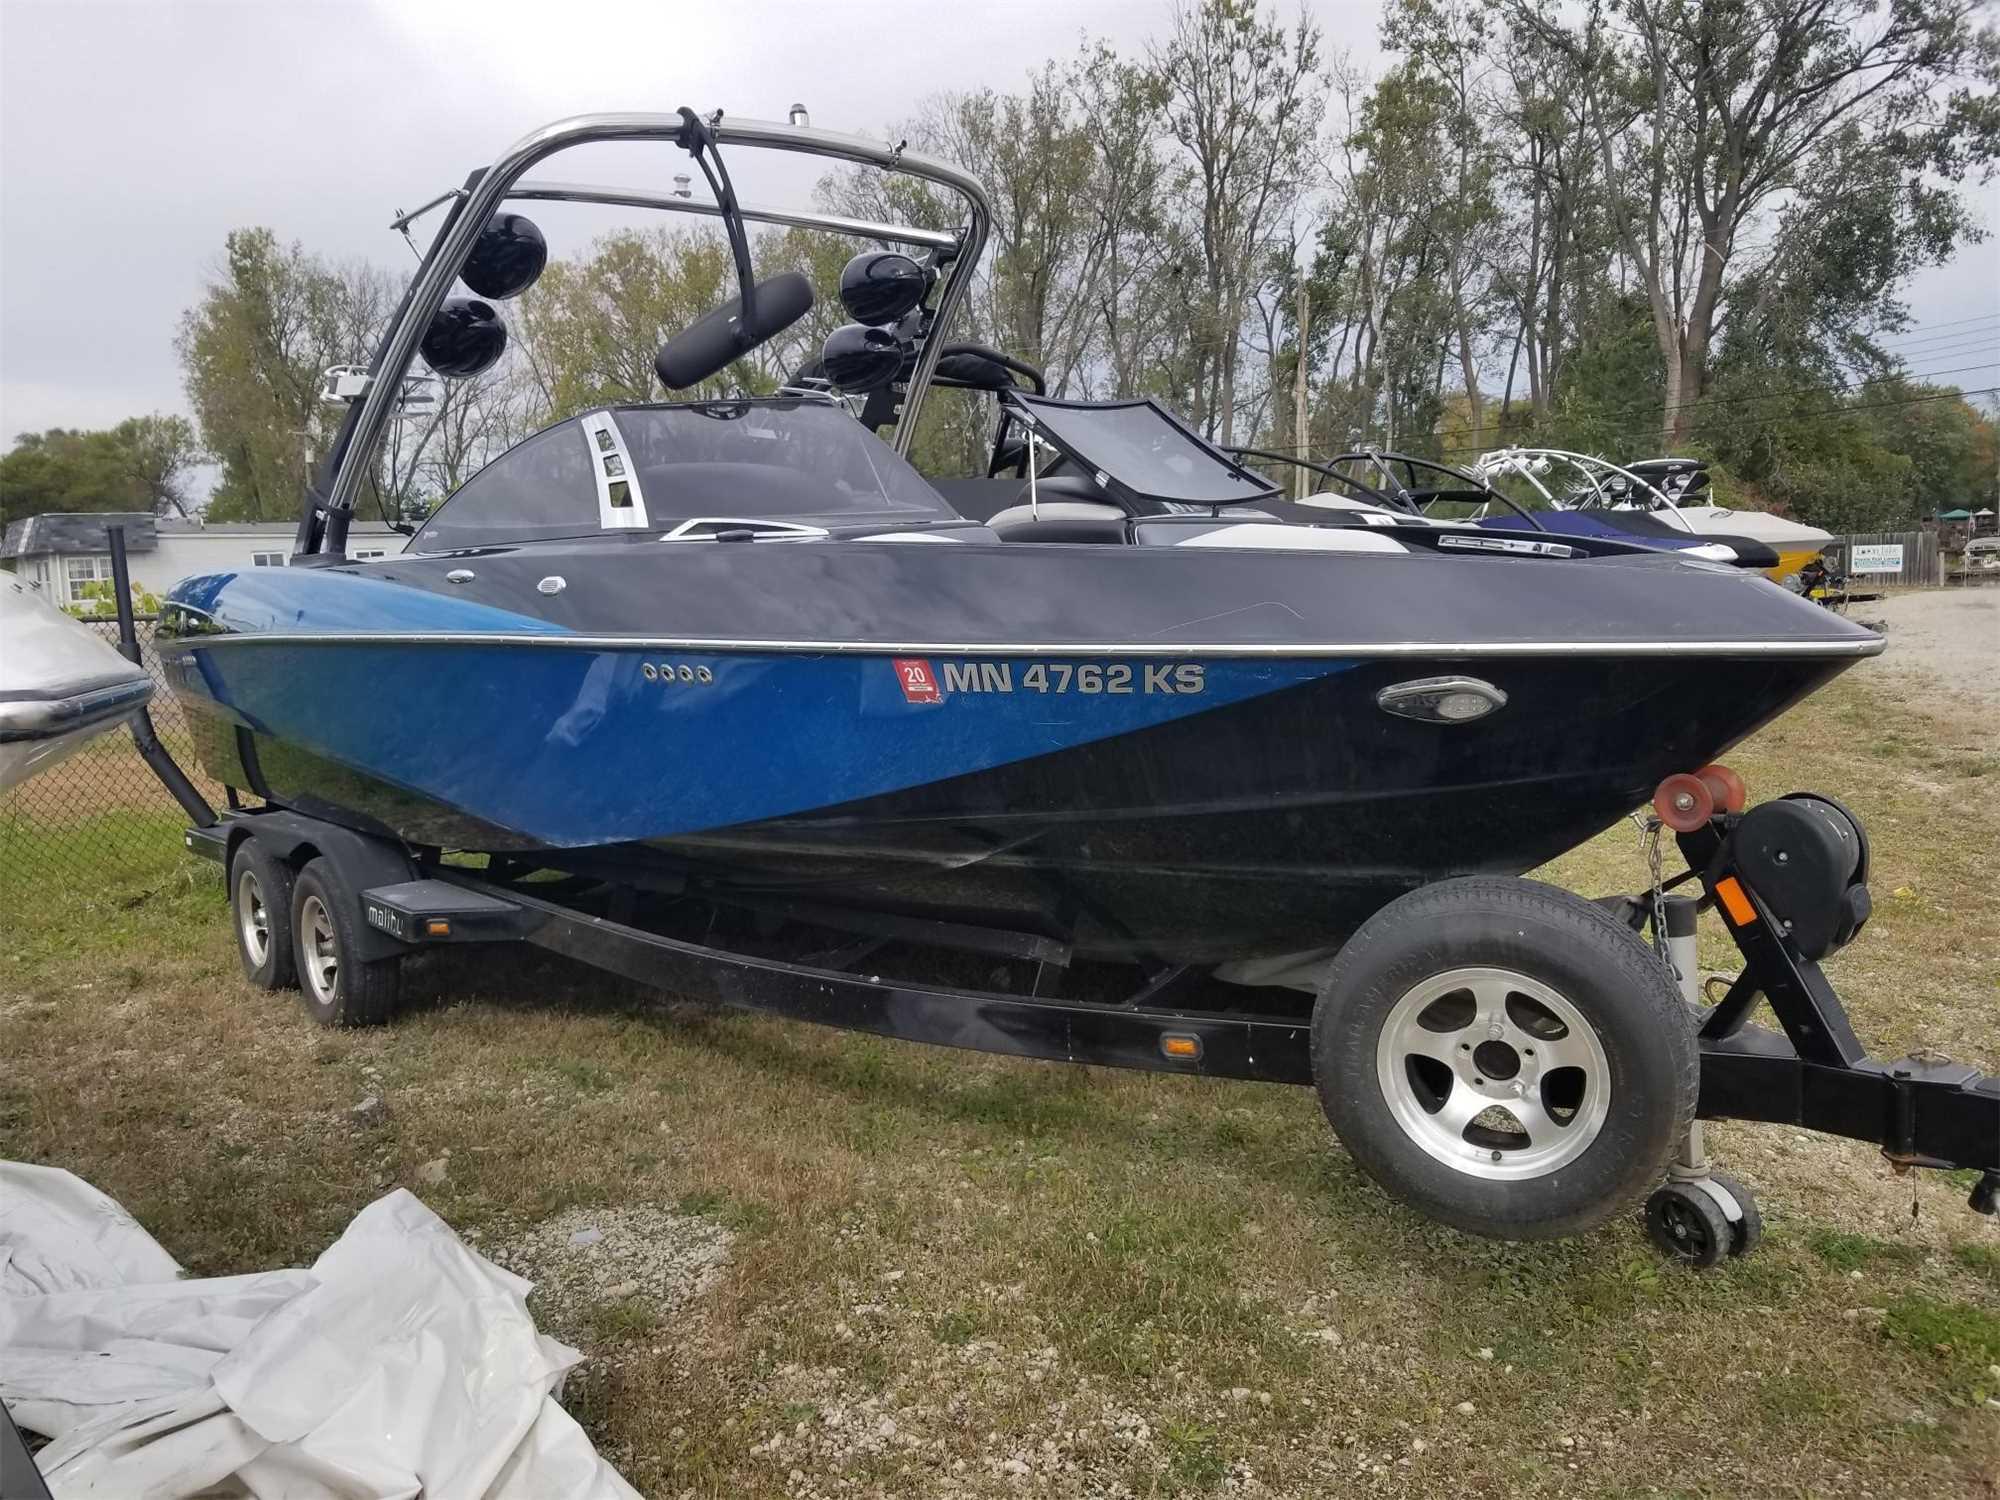 2011 Malibu Model: 247 LSV. VIN:MB2W3644C111. Hours: 500. This boat is located in Waterford Township